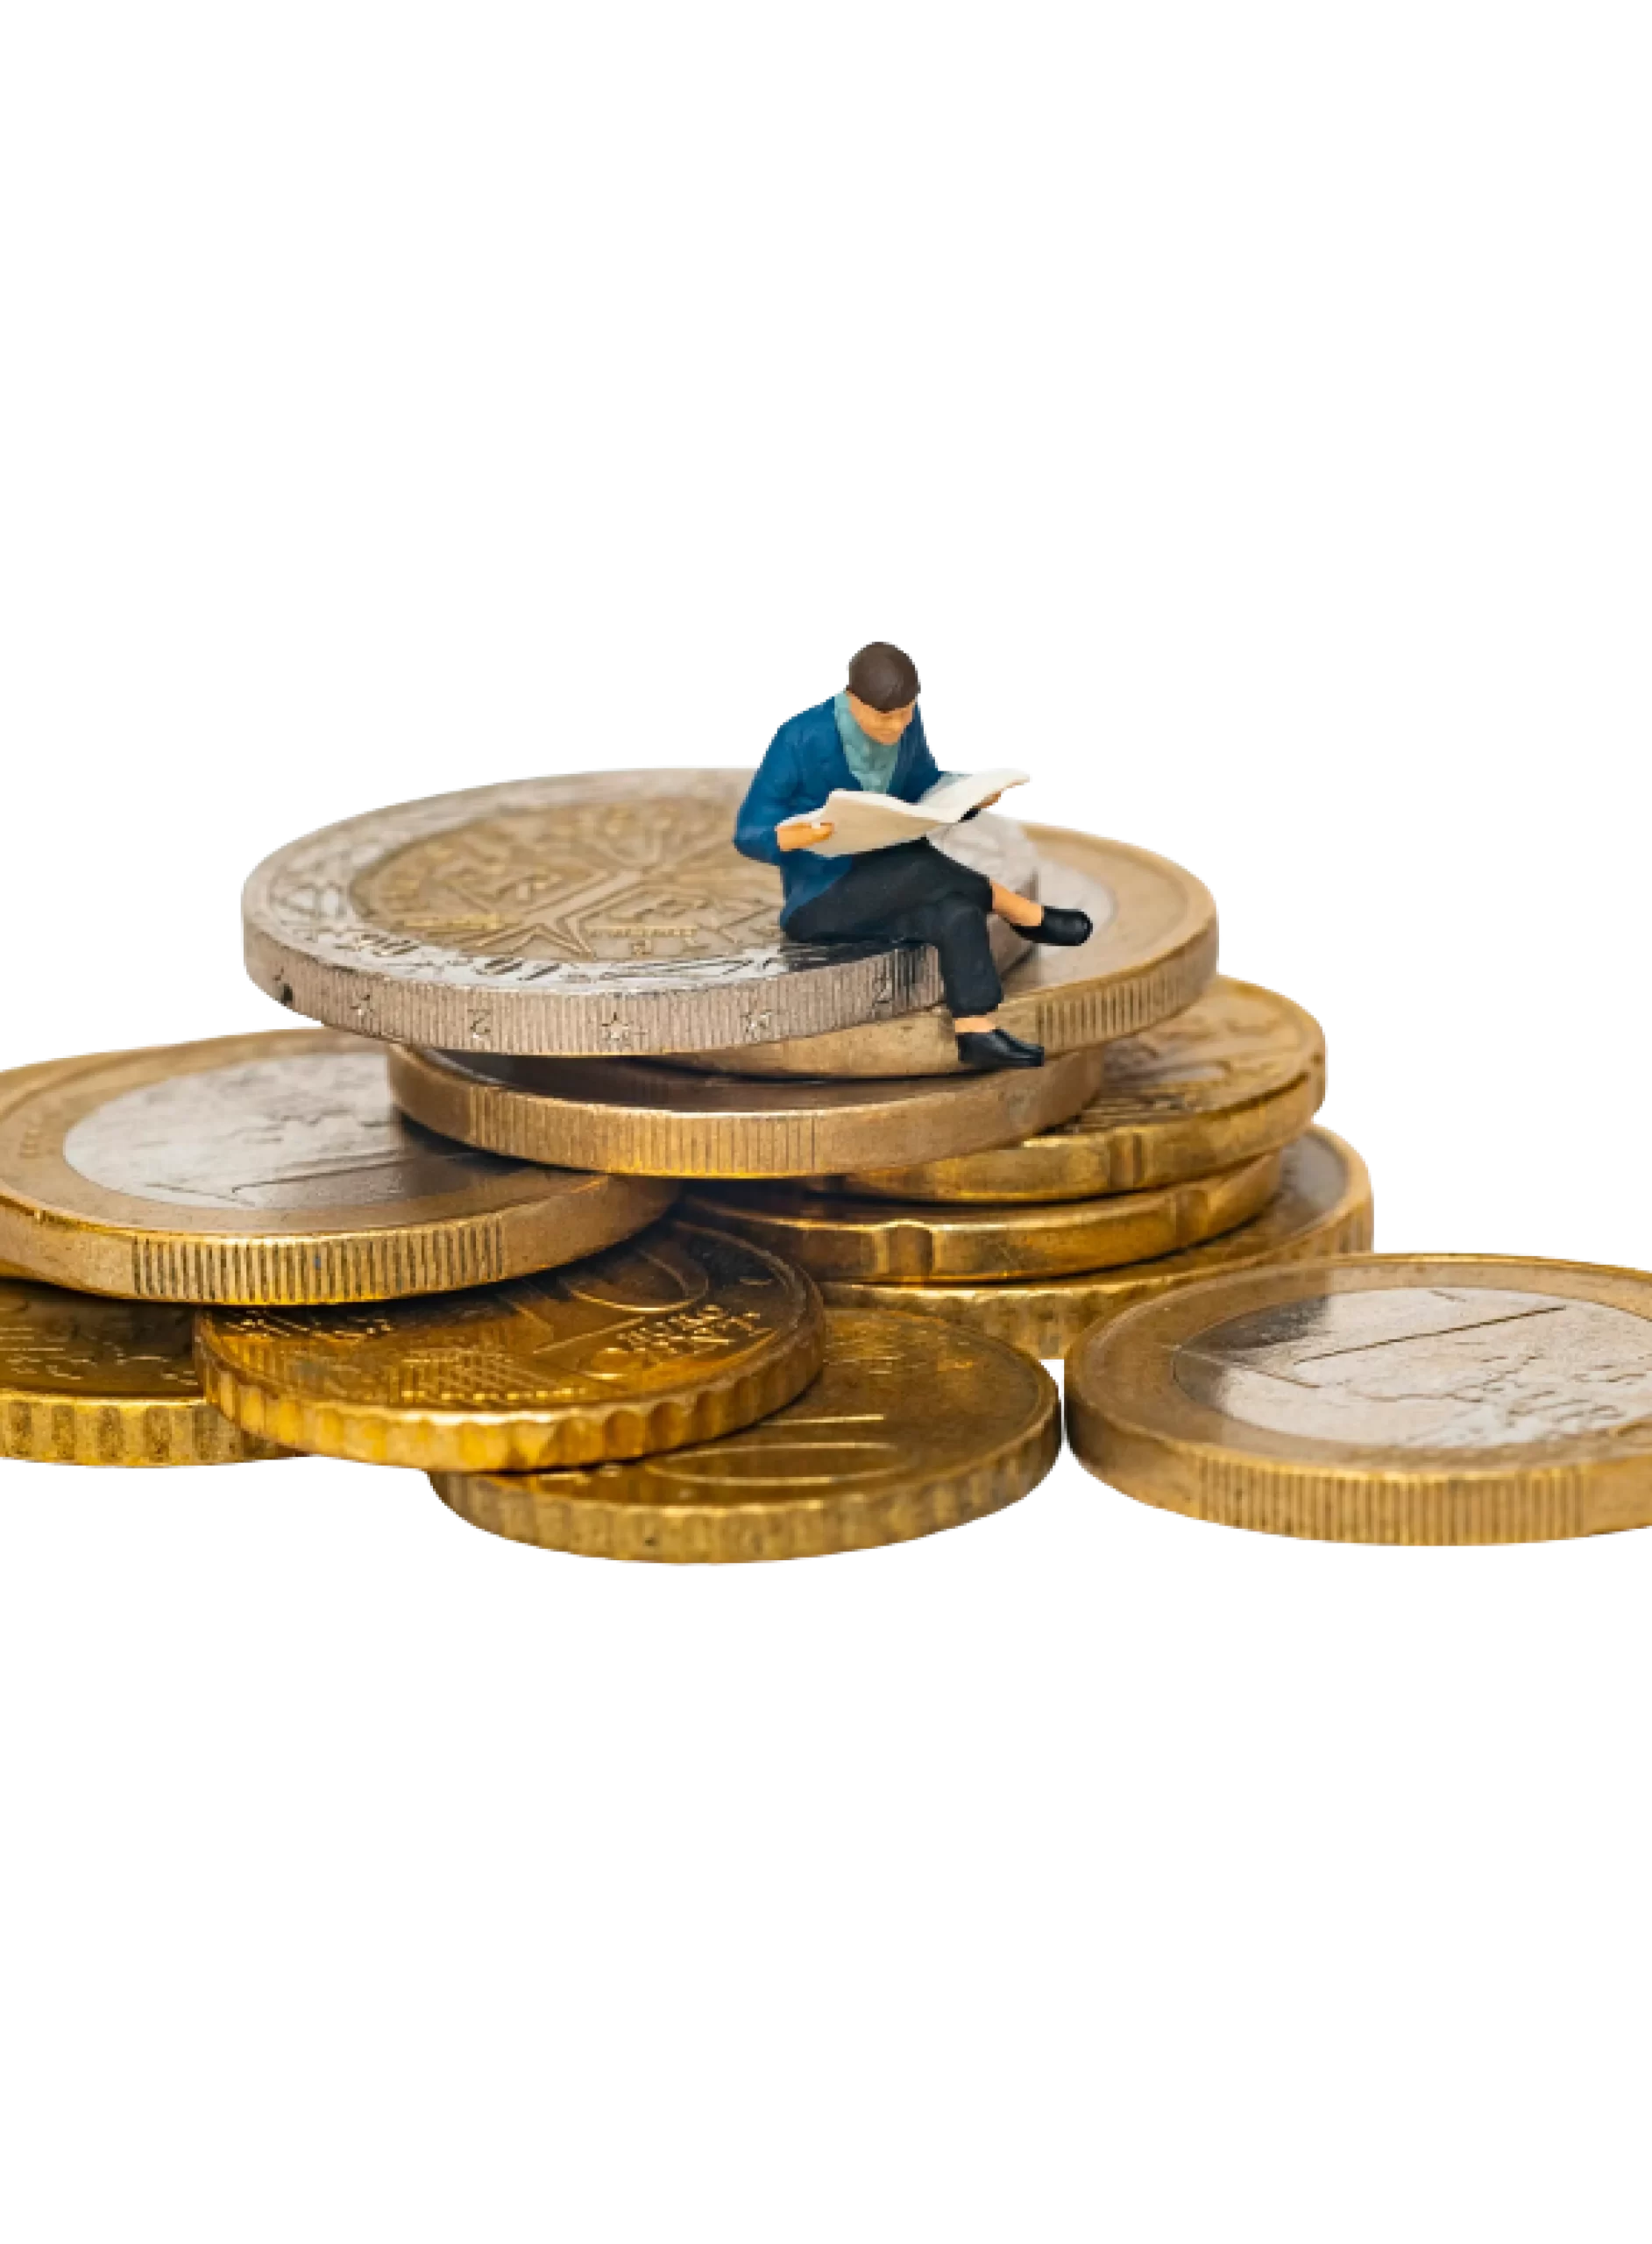 A man sitting on top of a stack of coins.